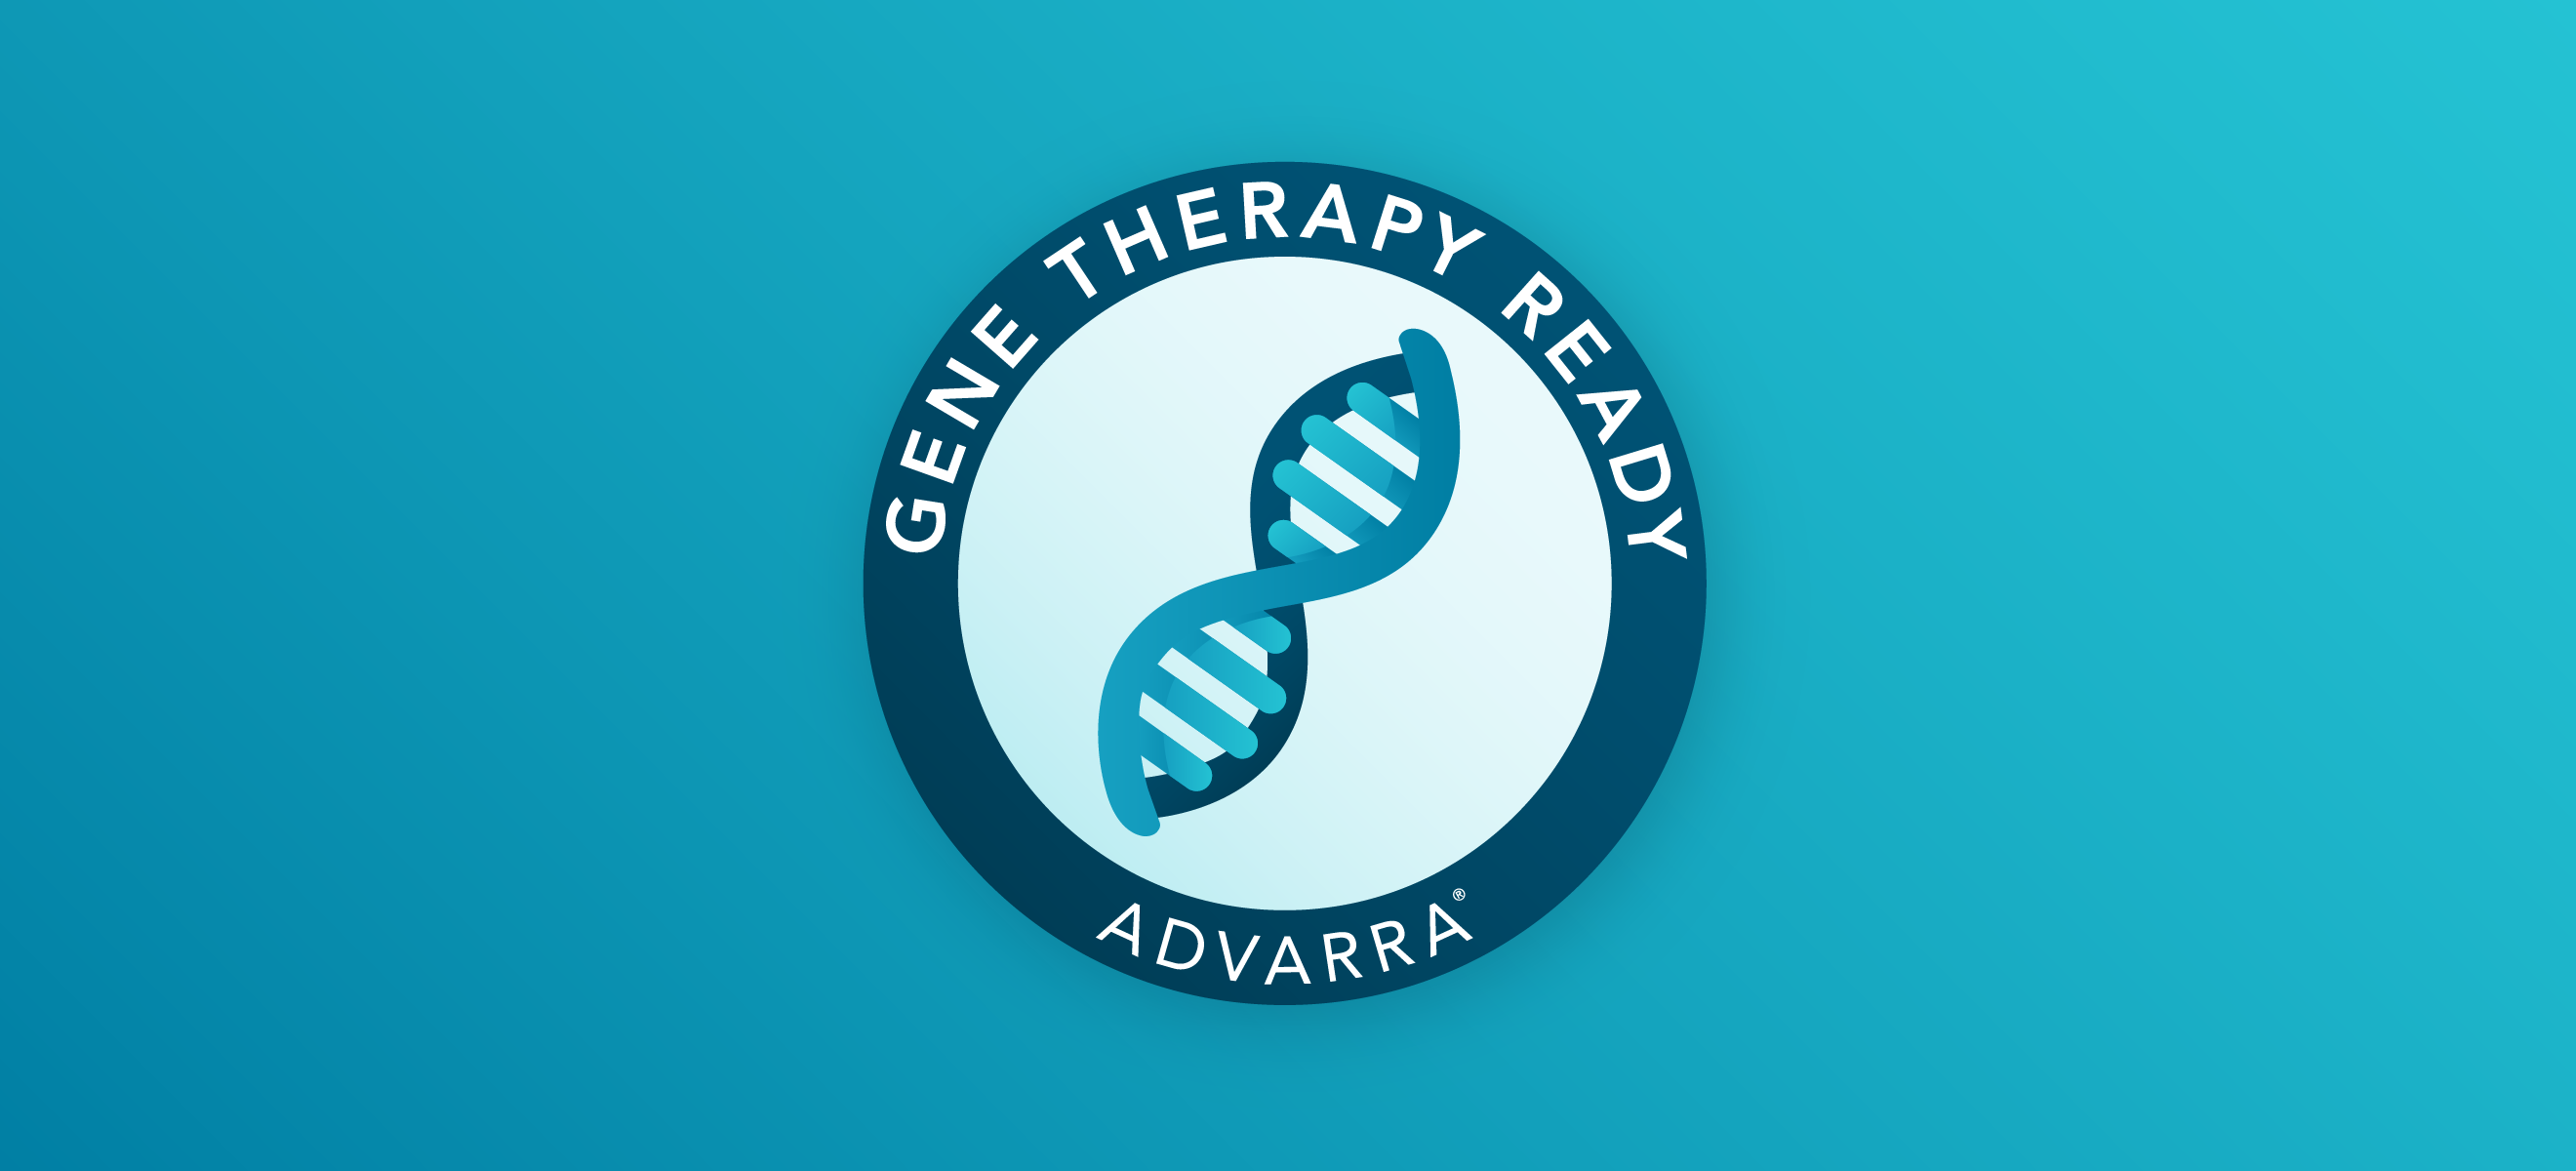 GeneTherapyReady_FeaturedImage.png